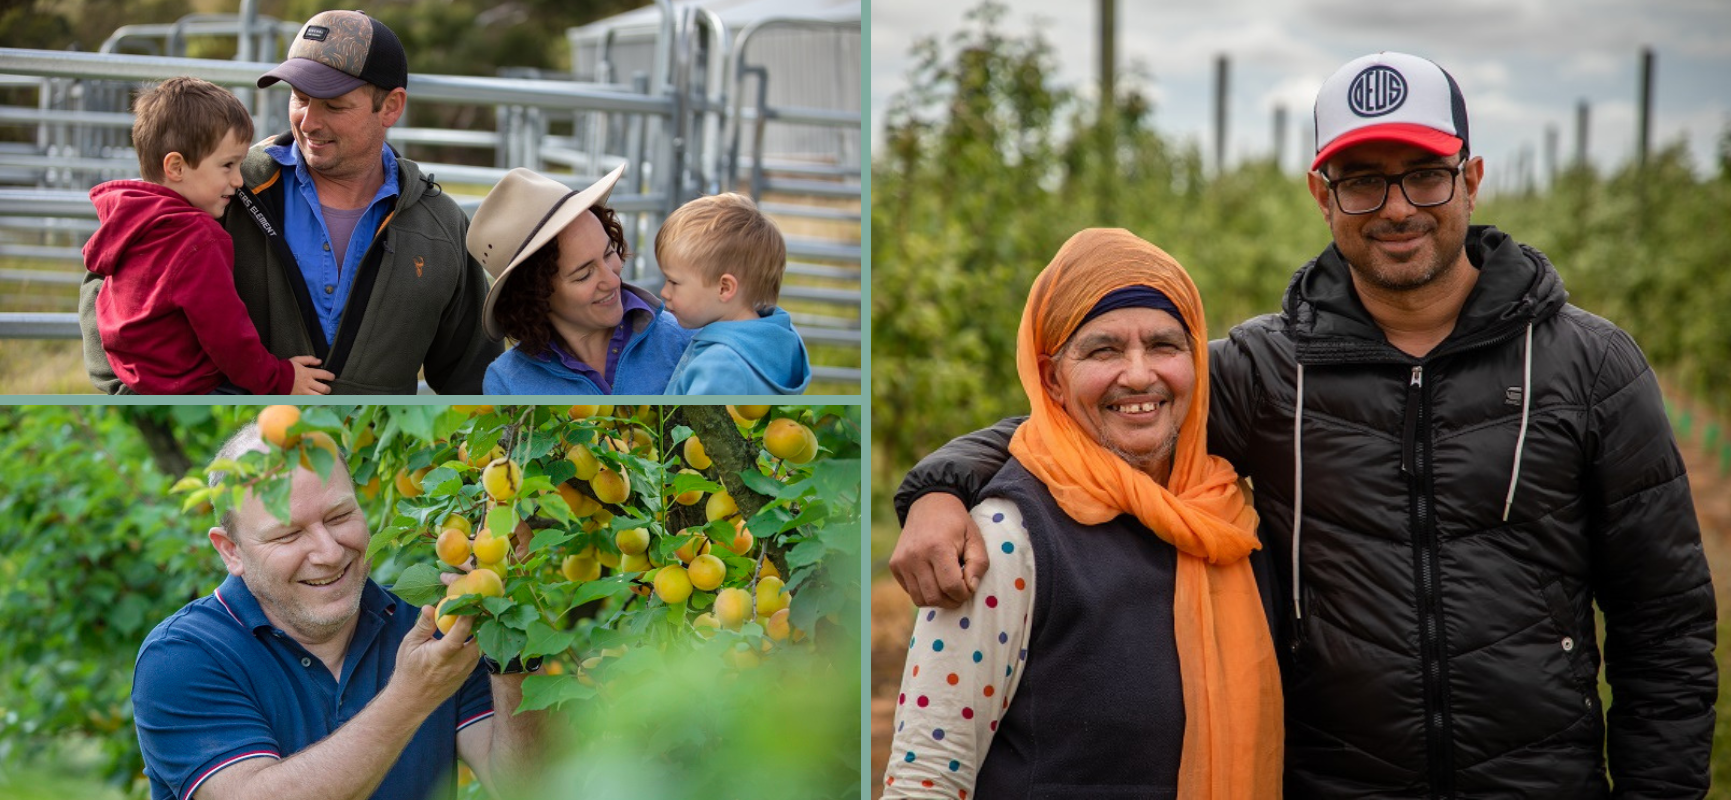 Images ALT Text: 1. Farming family smiling at each other standing in front of cattle yards. 2. Smiling man picking apricots in an orchard. 3. Smiling man with his arm around a woman, standing in an orchard.